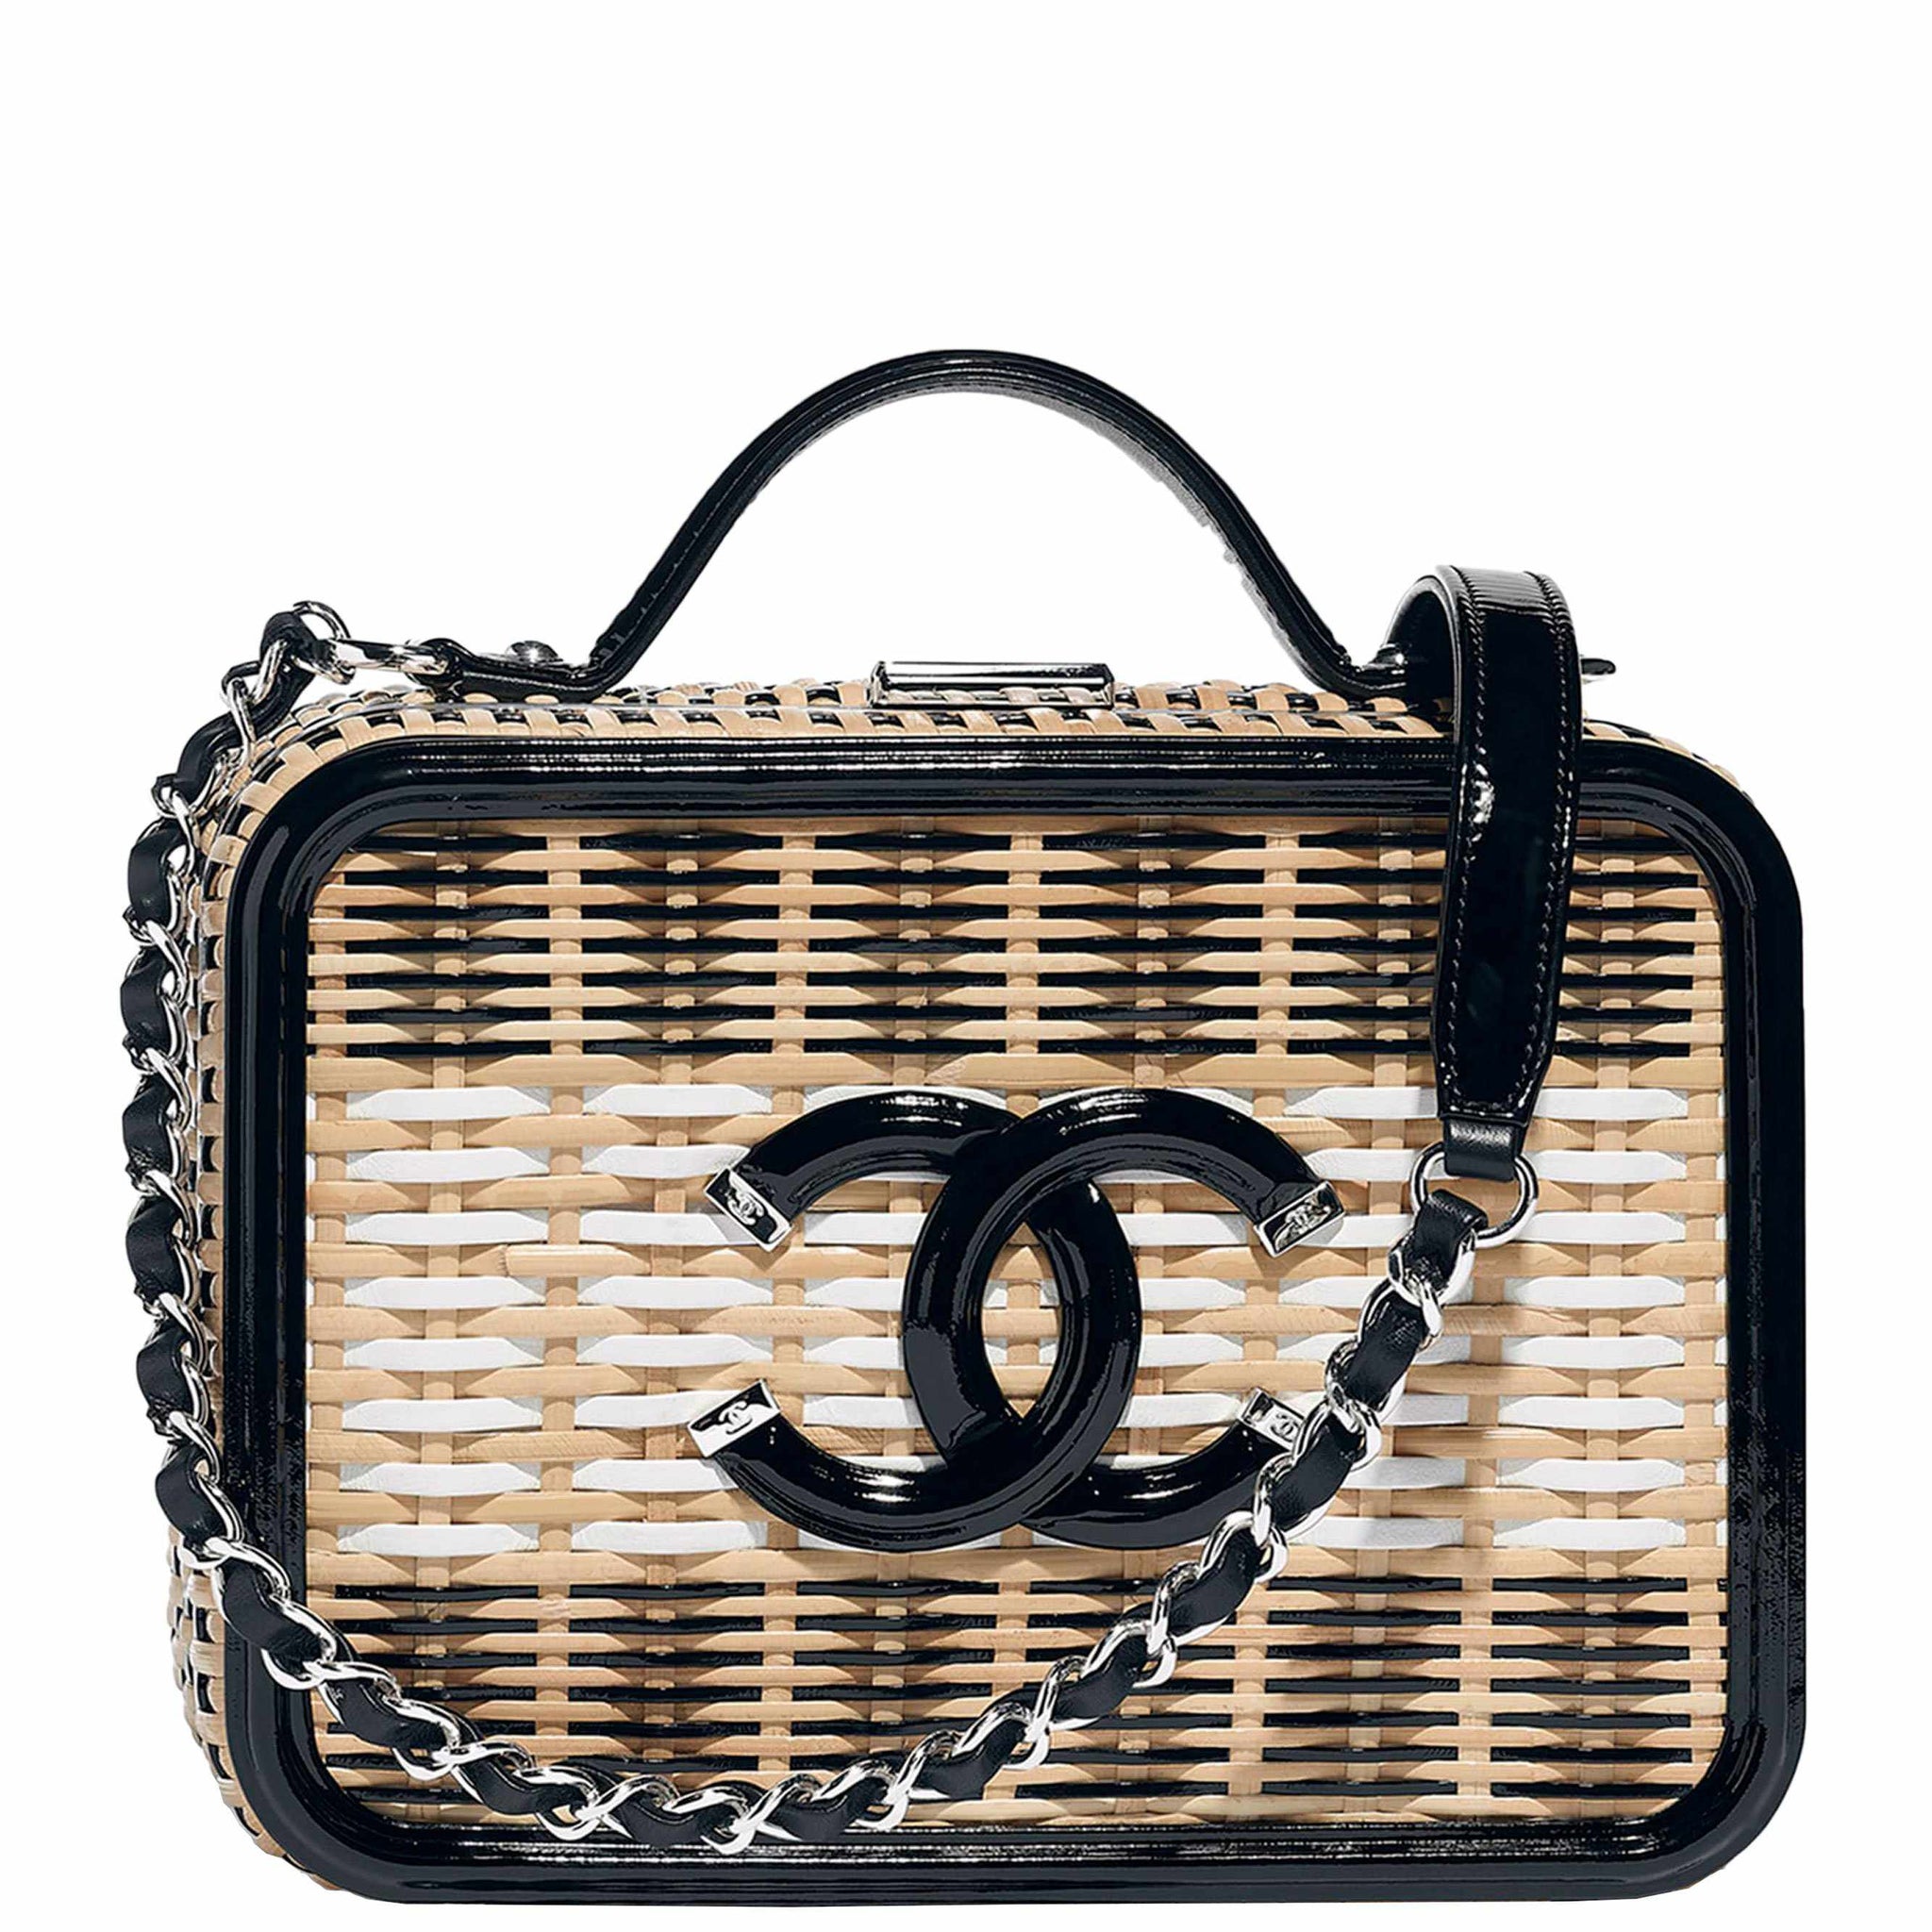 Chanel Perforated Woven Large Resin Interlocking C T-strap Wbox